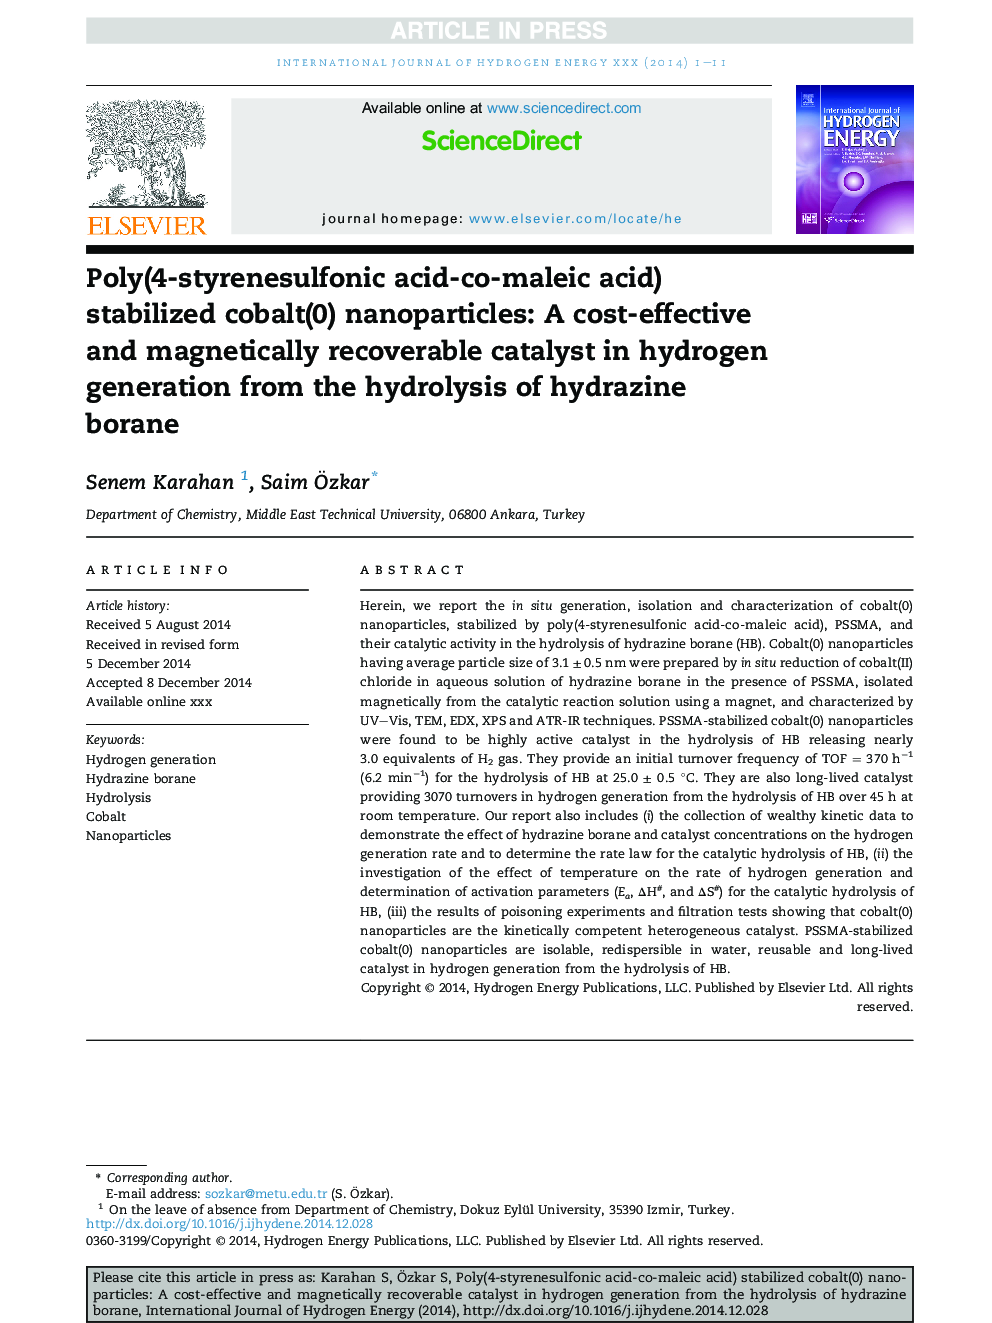 Poly(4-styrenesulfonic acid-co-maleic acid) stabilized cobalt(0) nanoparticles: A cost-effective and magnetically recoverable catalyst in hydrogen generation from the hydrolysis of hydrazine borane